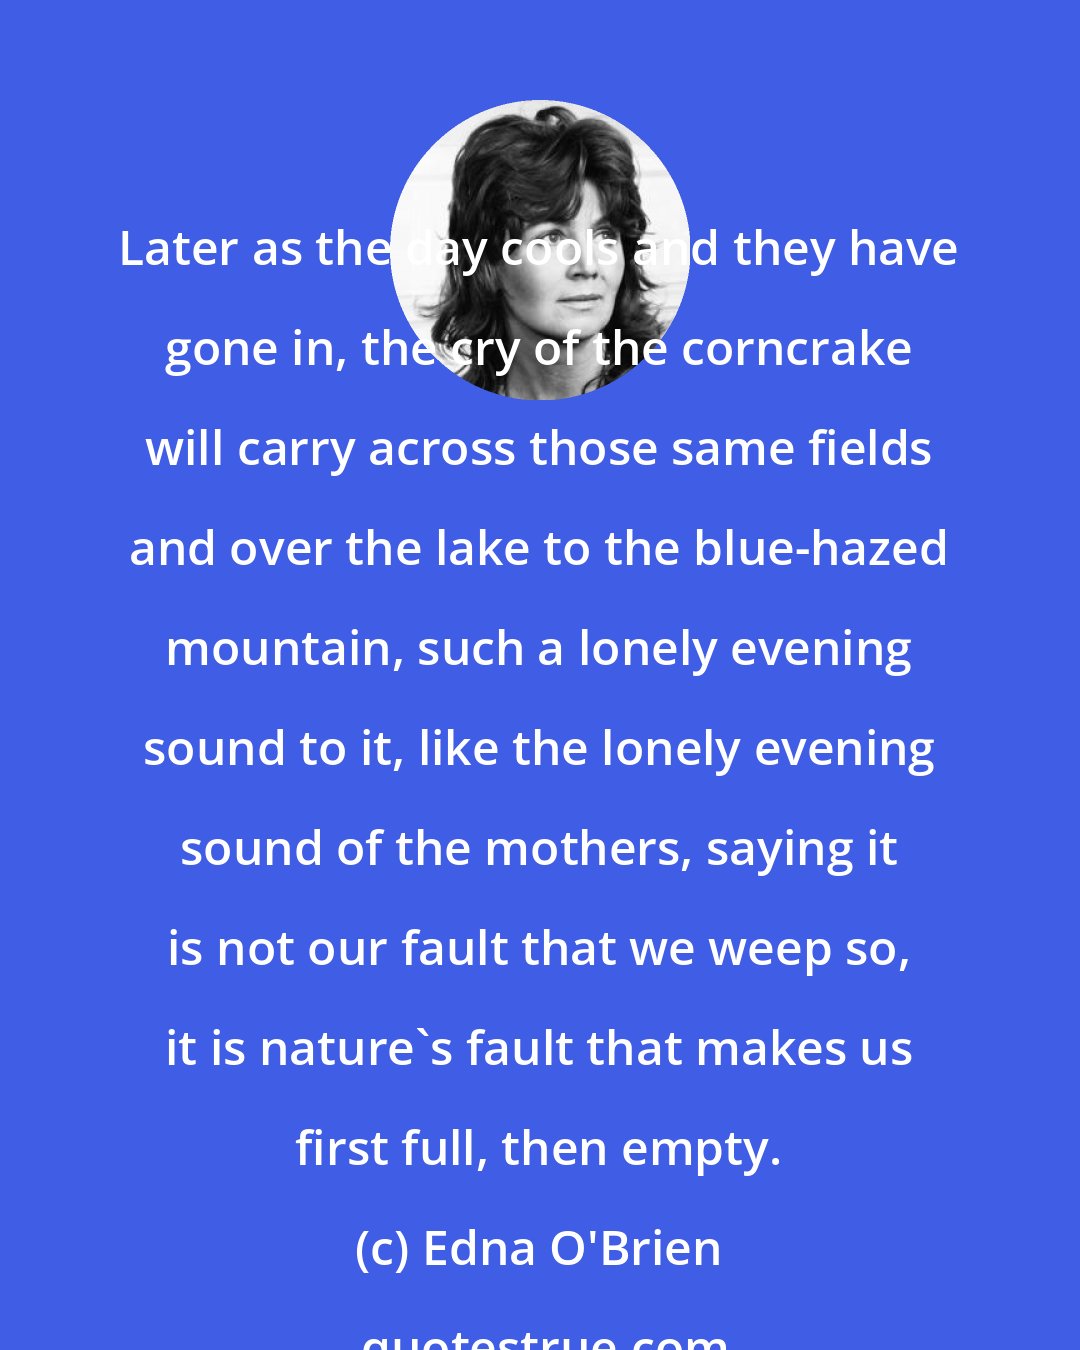 Edna O'Brien: Later as the day cools and they have gone in, the cry of the corncrake will carry across those same fields and over the lake to the blue-hazed mountain, such a lonely evening sound to it, like the lonely evening sound of the mothers, saying it is not our fault that we weep so, it is nature's fault that makes us first full, then empty.